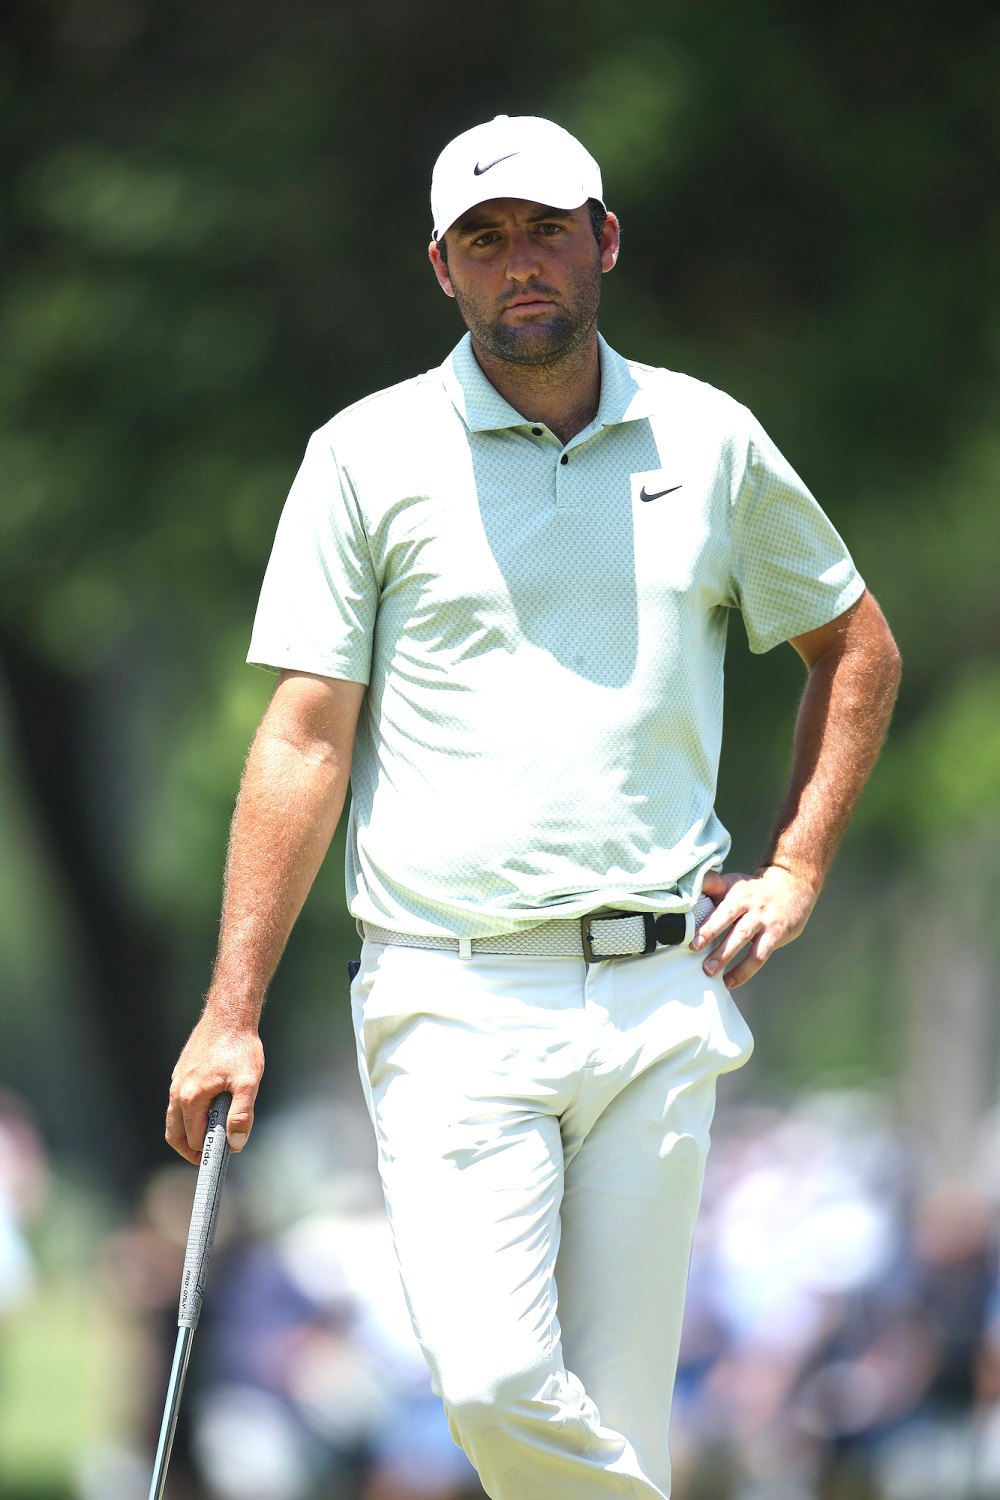 PGA Golfer Scottie Scheffler Speaks Out After Charges Against Him Are Dropped Chaotic Situation